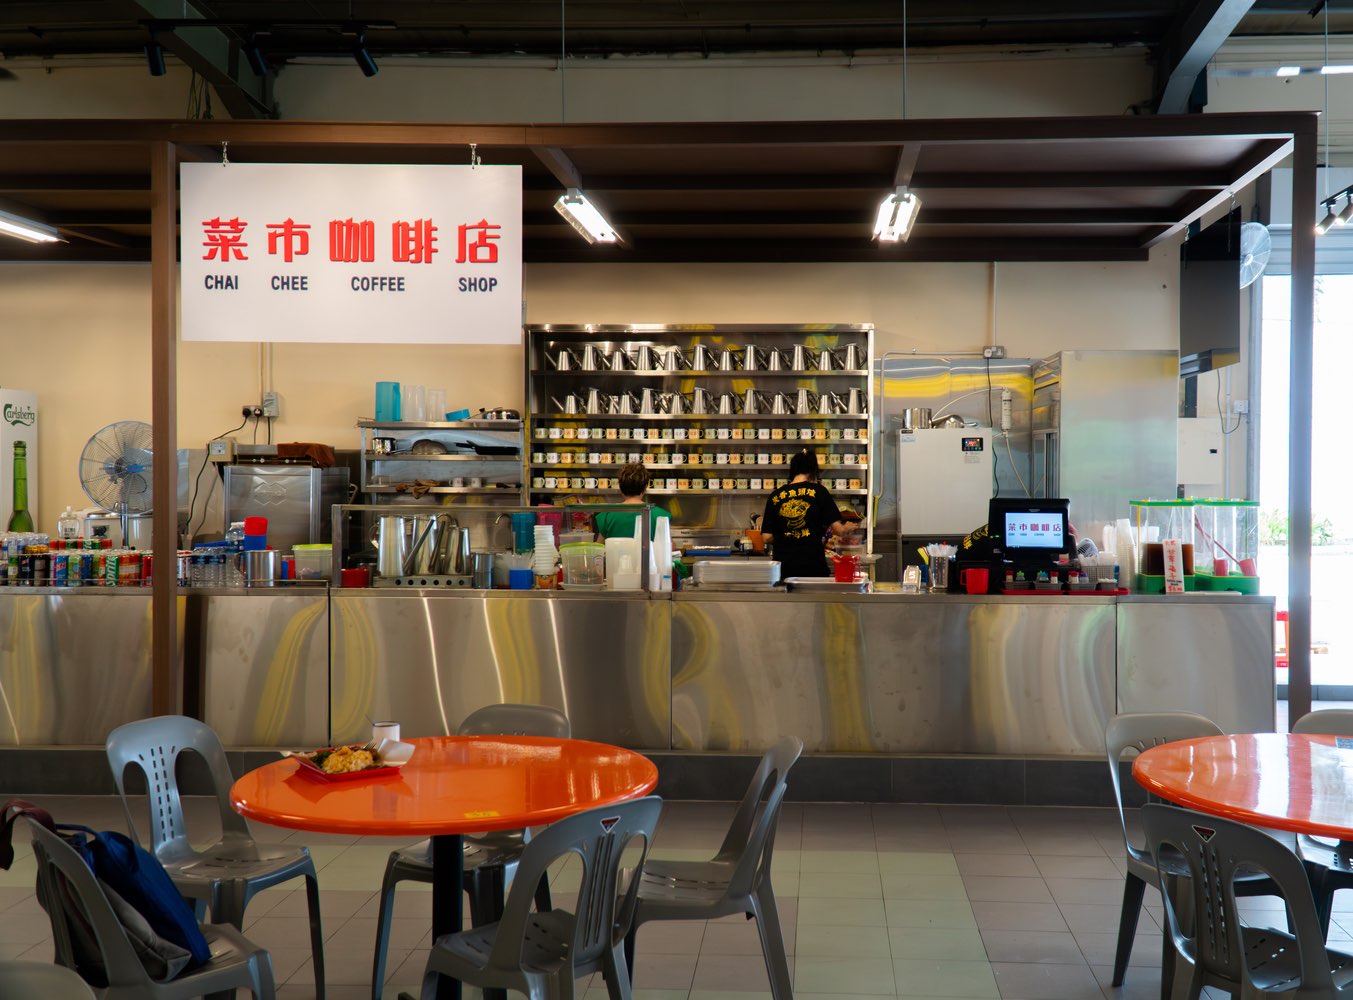 , Visit this 1980s wet market-themed coffee shop in Chai Chee for live seafood, old-school drinks, and nostalgic memories